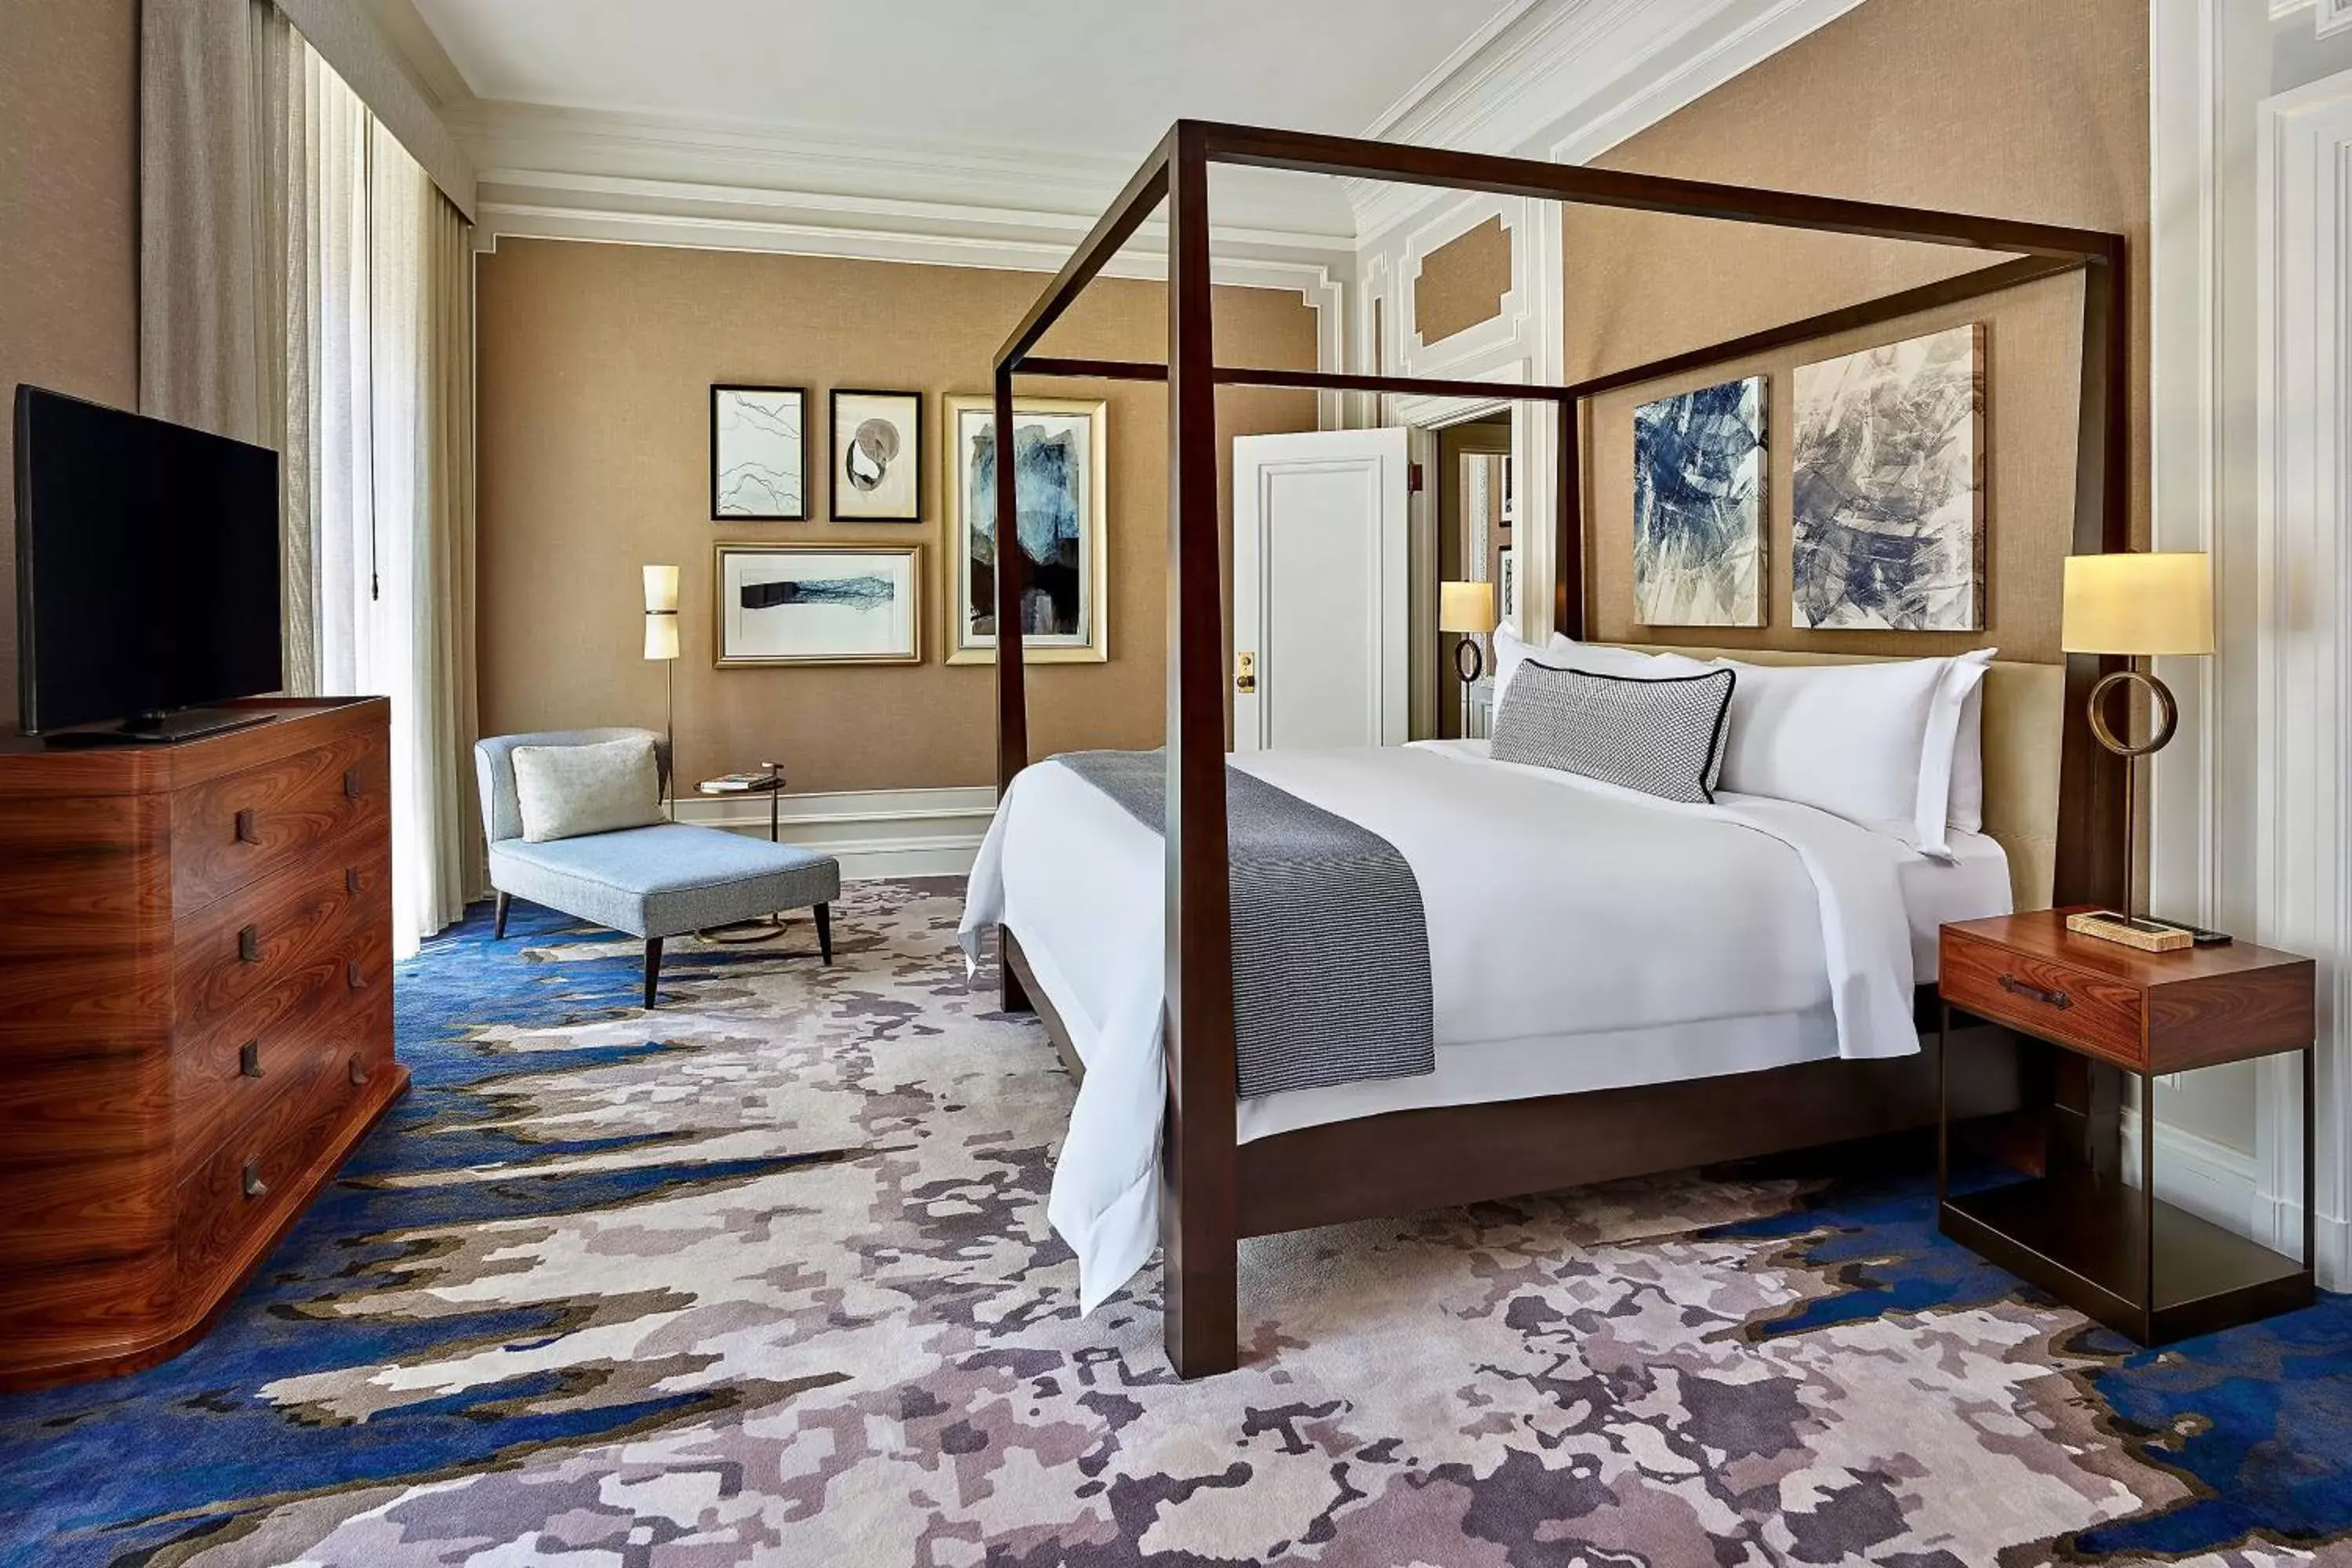 Bedroom in Palace Hotel, a Luxury Collection Hotel, San Francisco